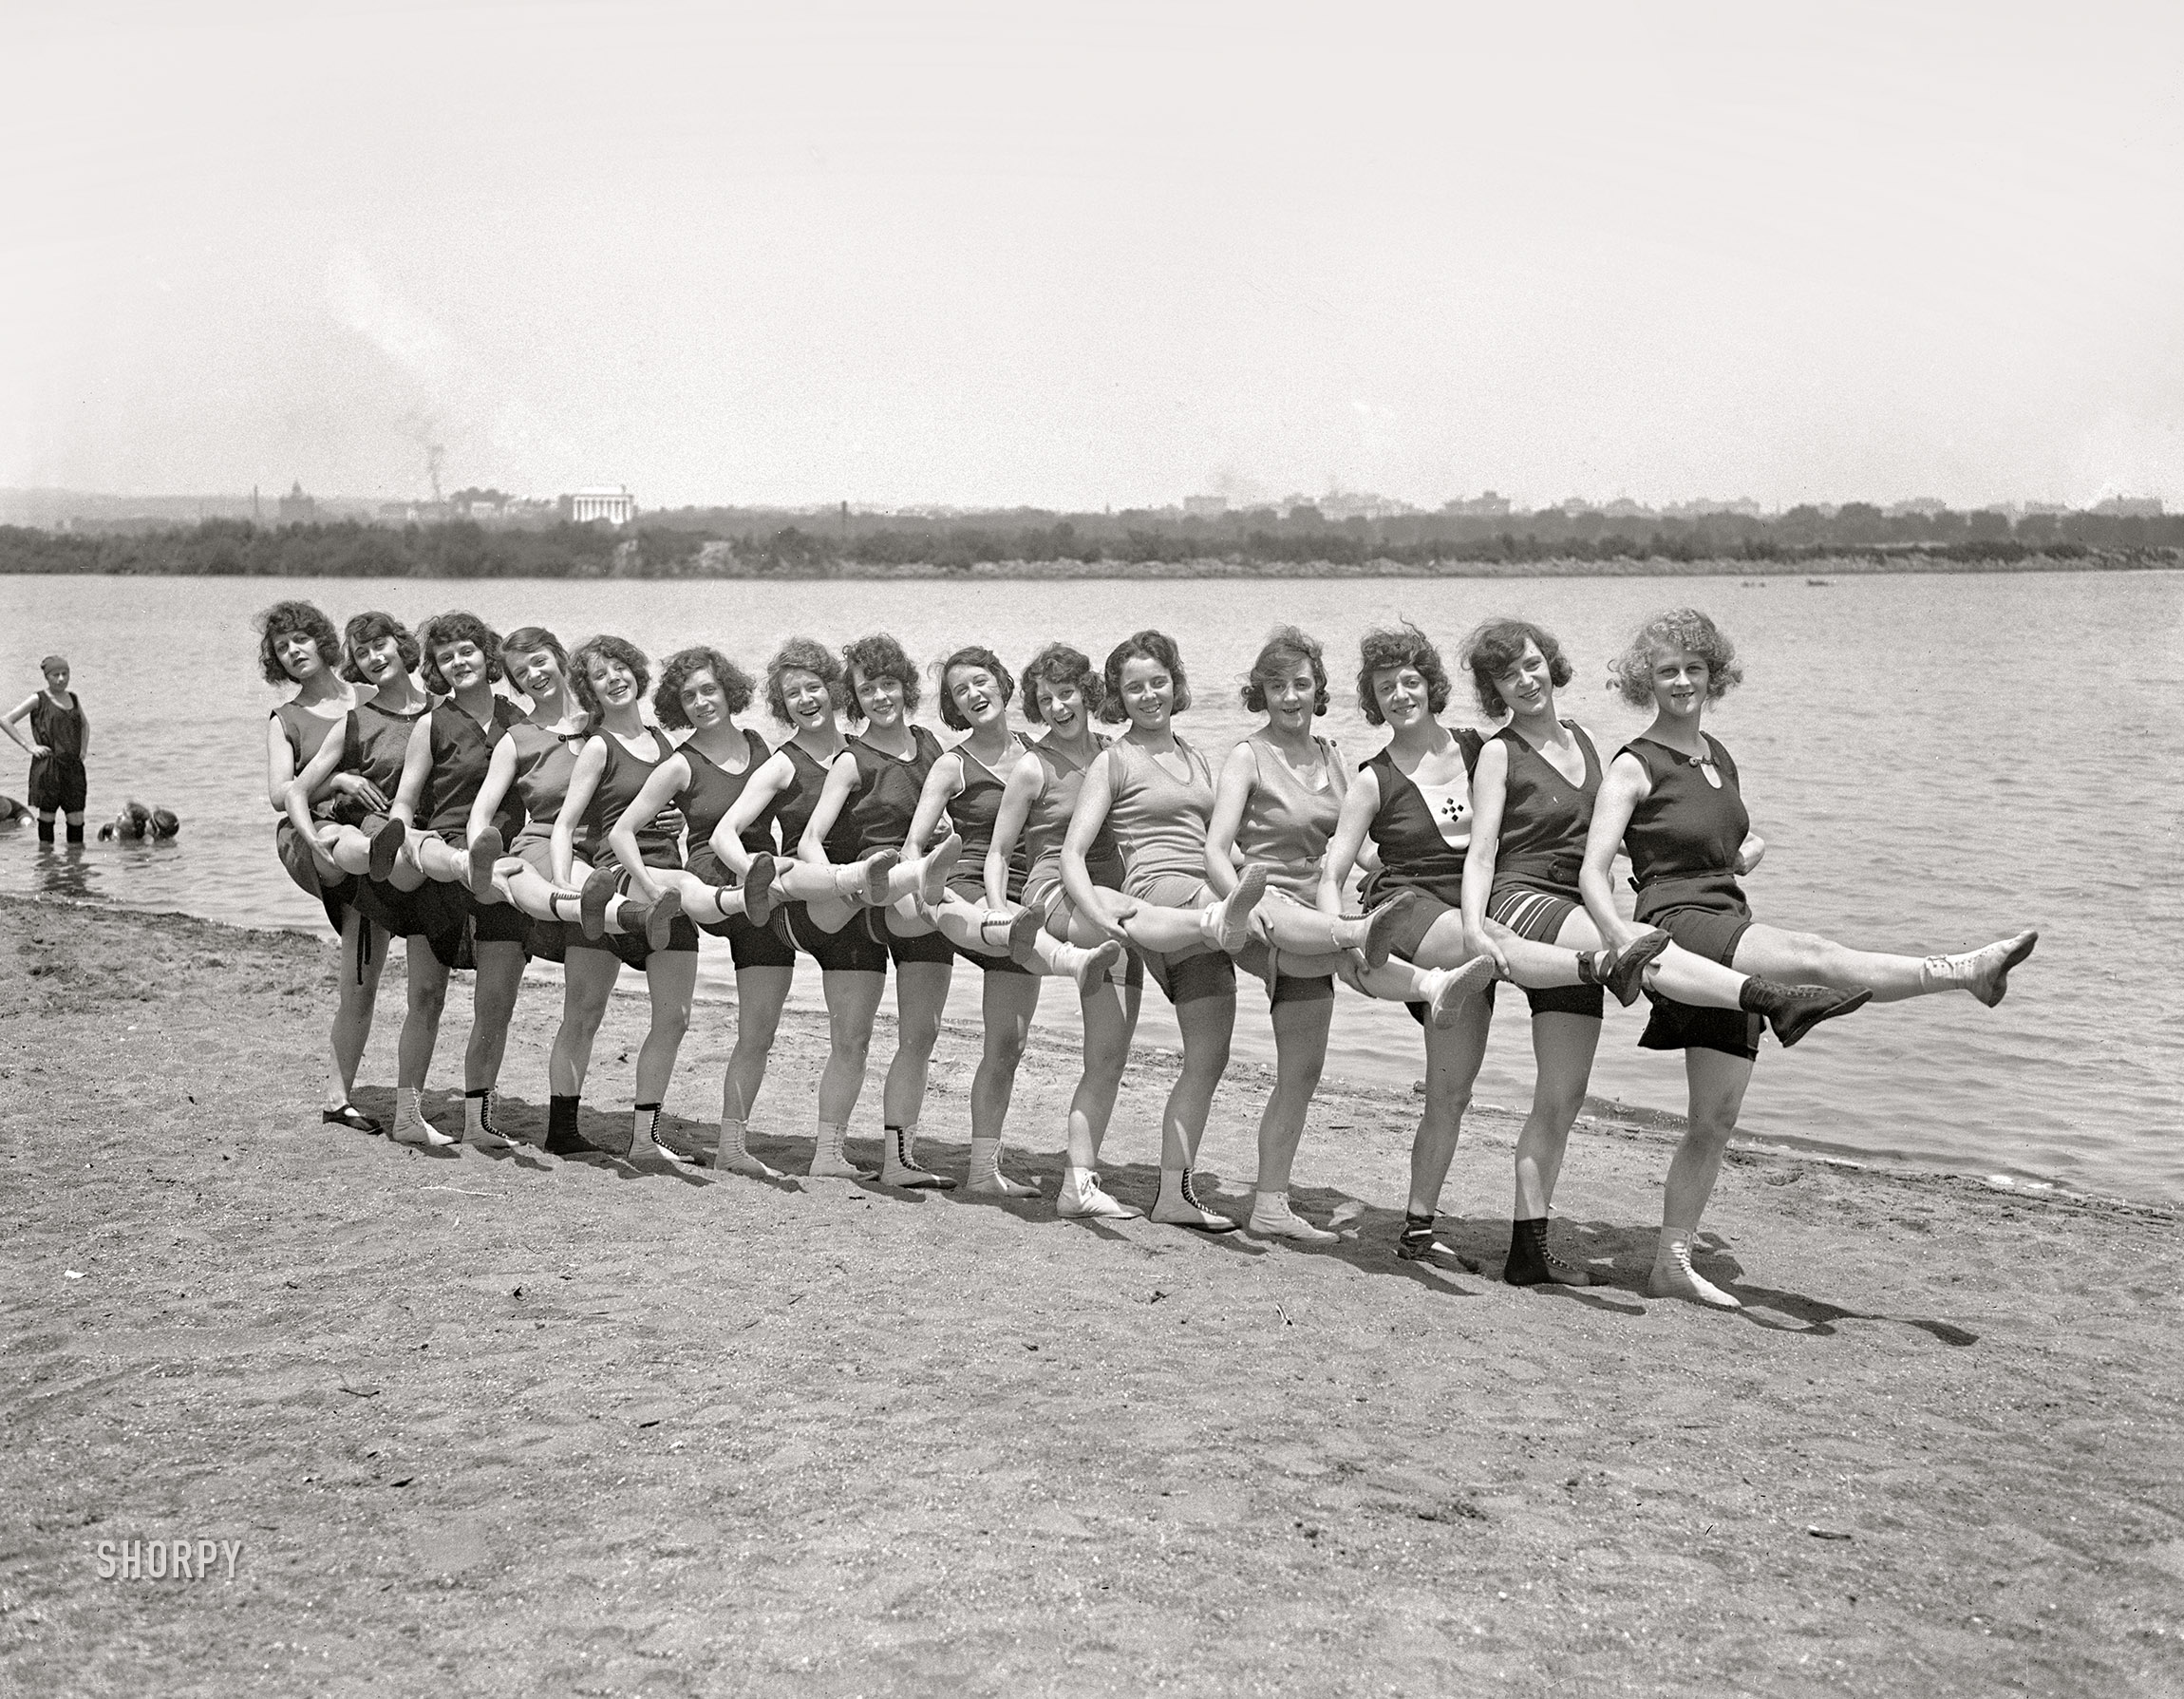 July 18, 1923. Washington, D.C. "Sunshine Girls dancing on beach." The British dance troupe last seen here, visiting the national capital for an engagement at the B.F. Keith vaudeville house. Harris & Ewing glass negative. View full size.